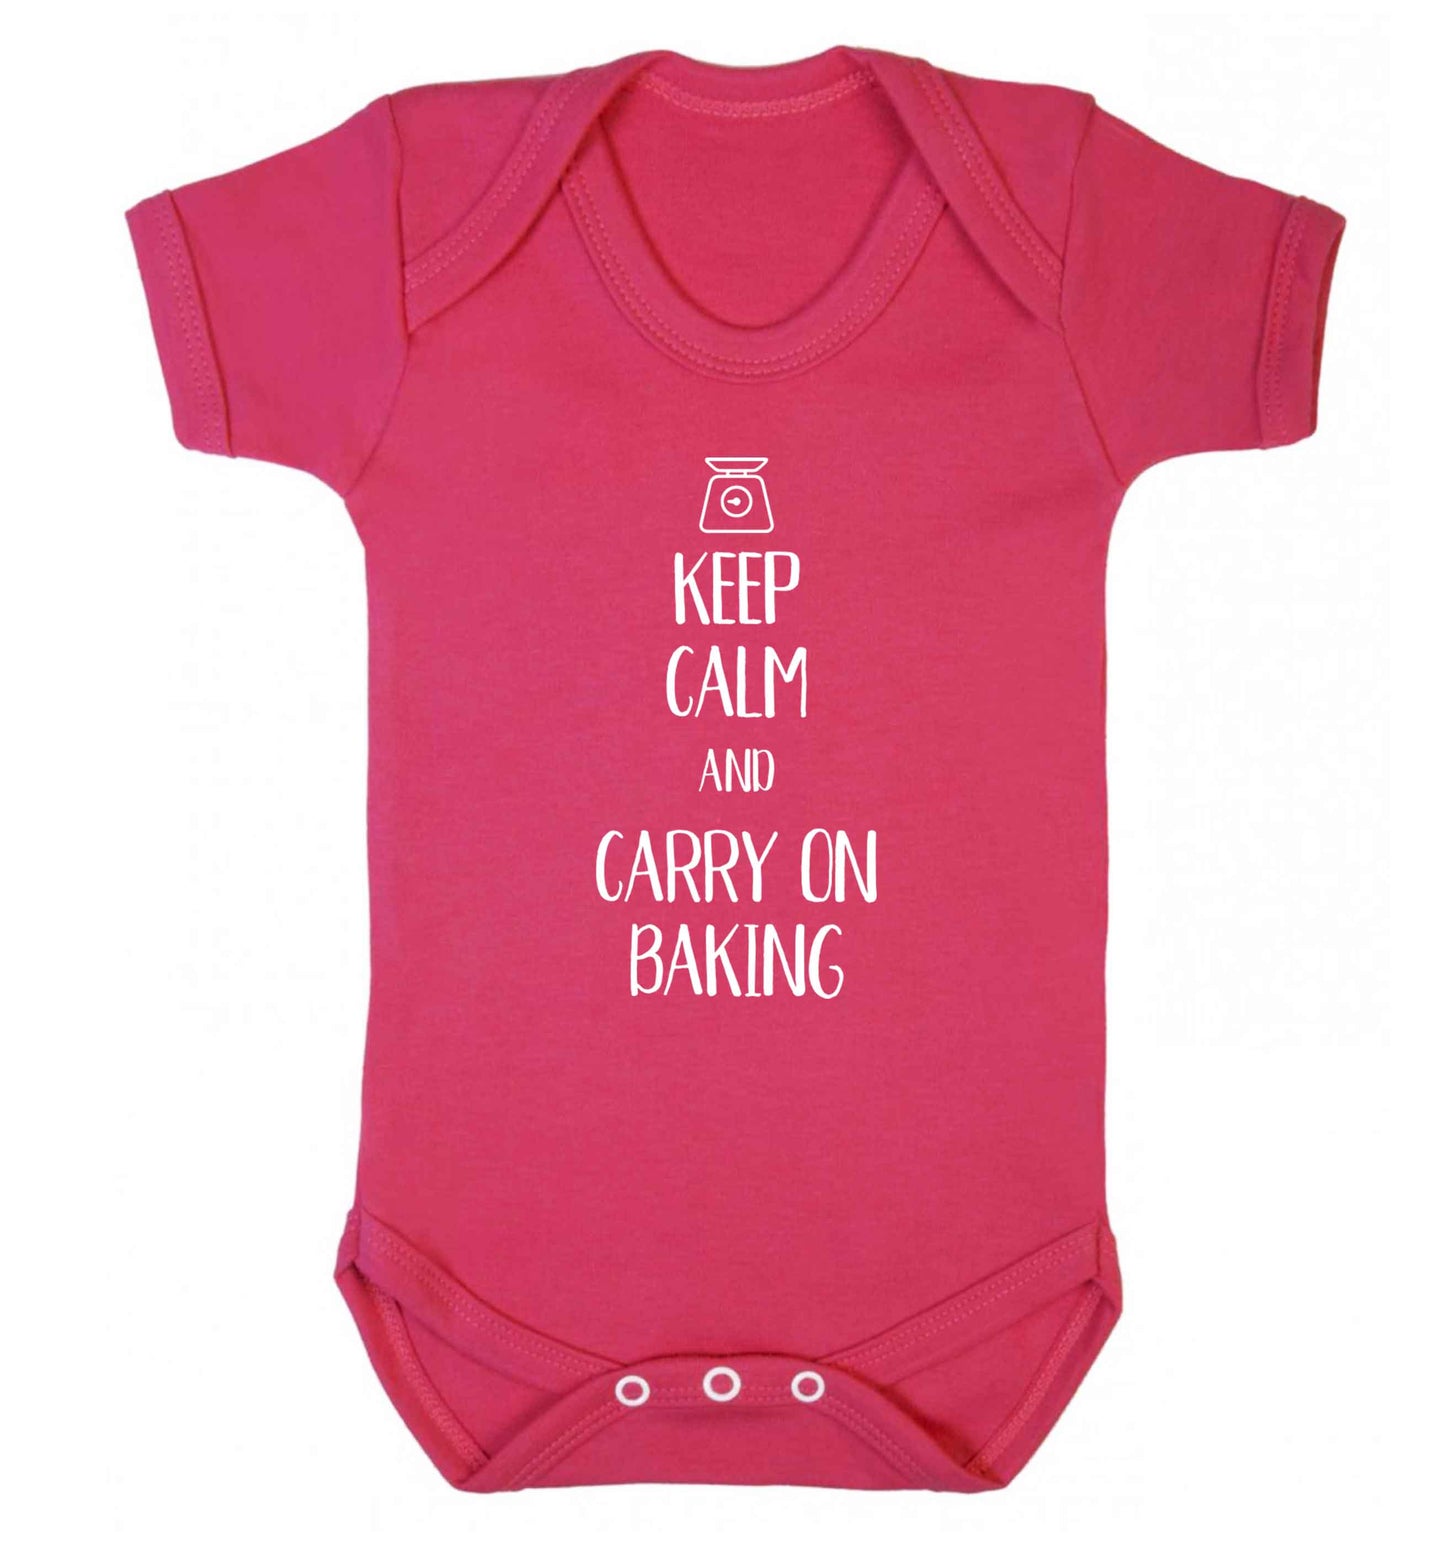 Keep calm and carry on baking Baby Vest dark pink 18-24 months